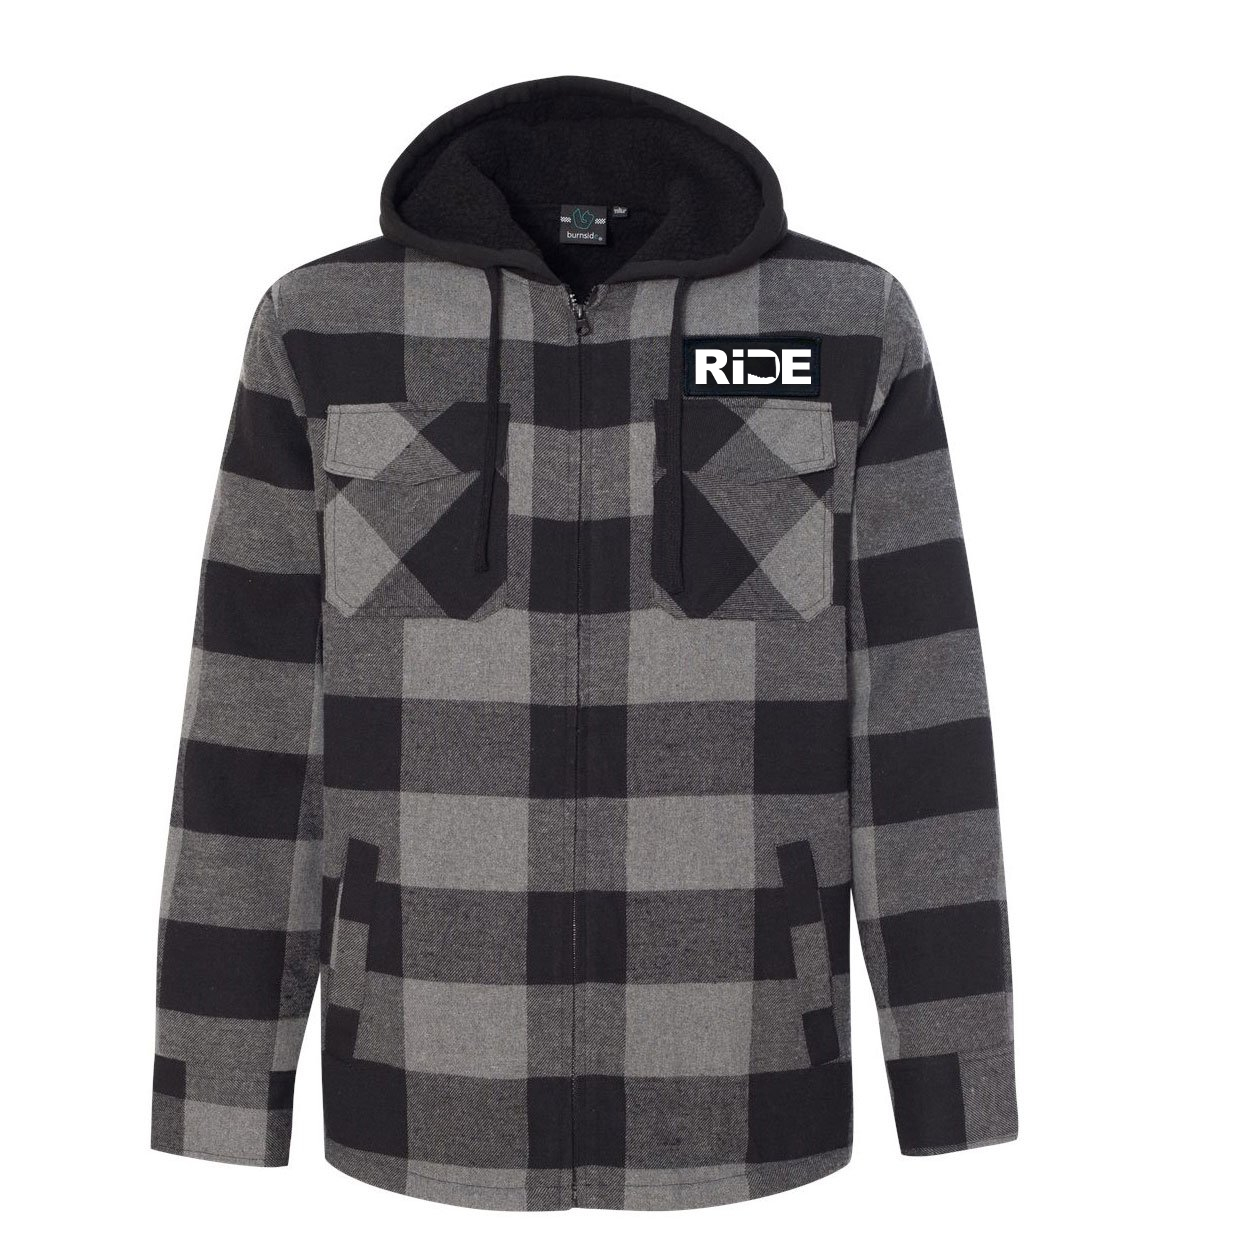 Ride Oklahoma Classic Unisex Full Zip Woven Patch Hooded Flannel Jacket Black/Gray (White Logo)